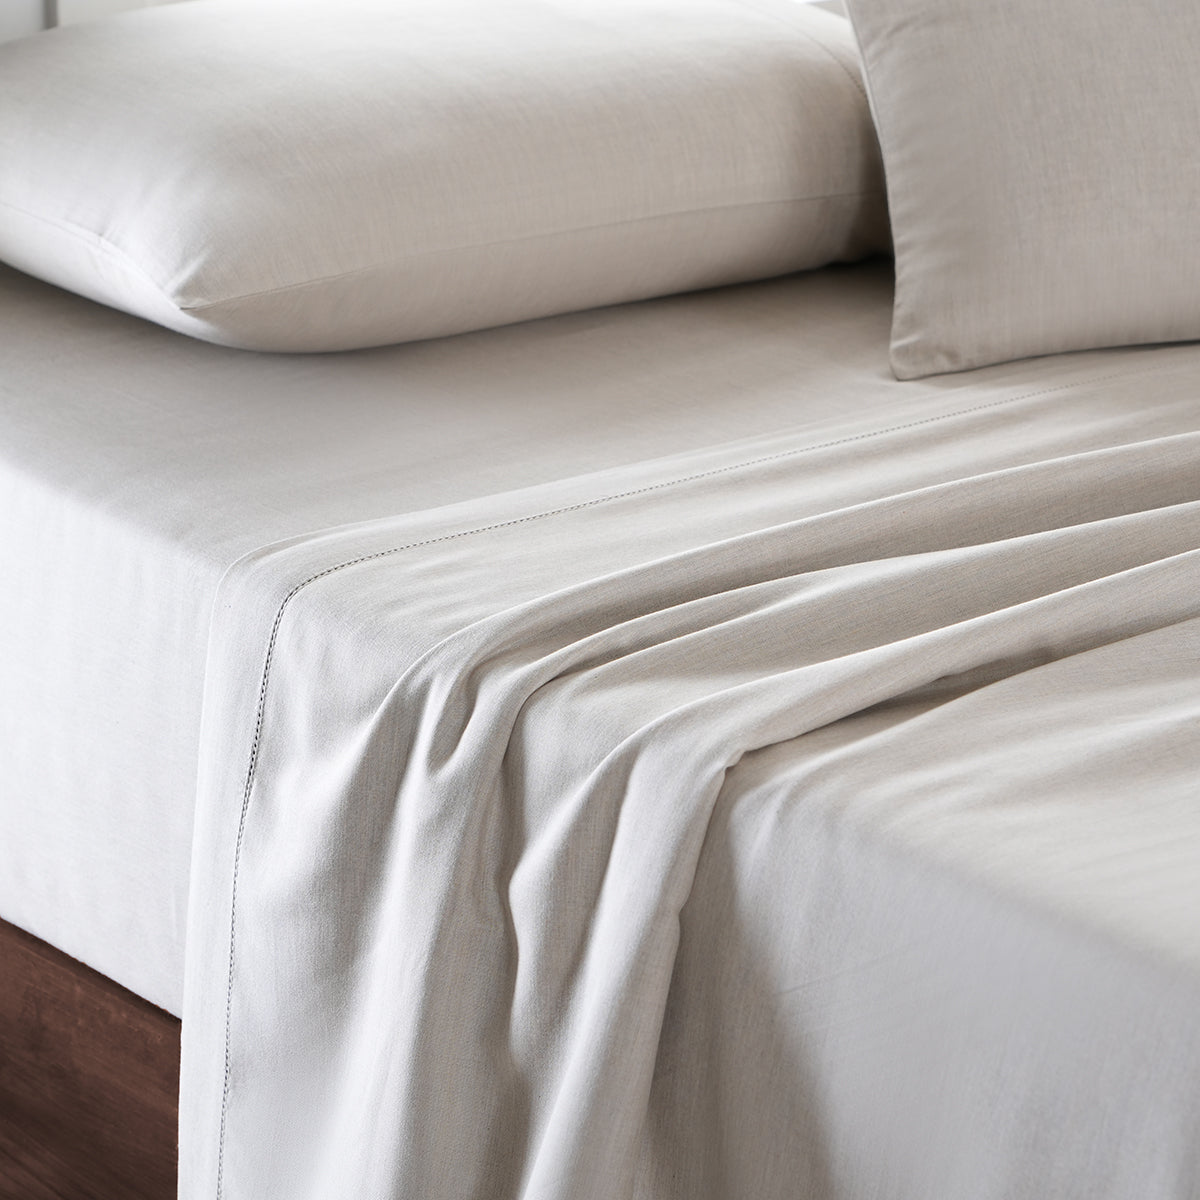 Emmie Made With Egyptian Cotton Ultra Soft Light Beige Bed Sheet